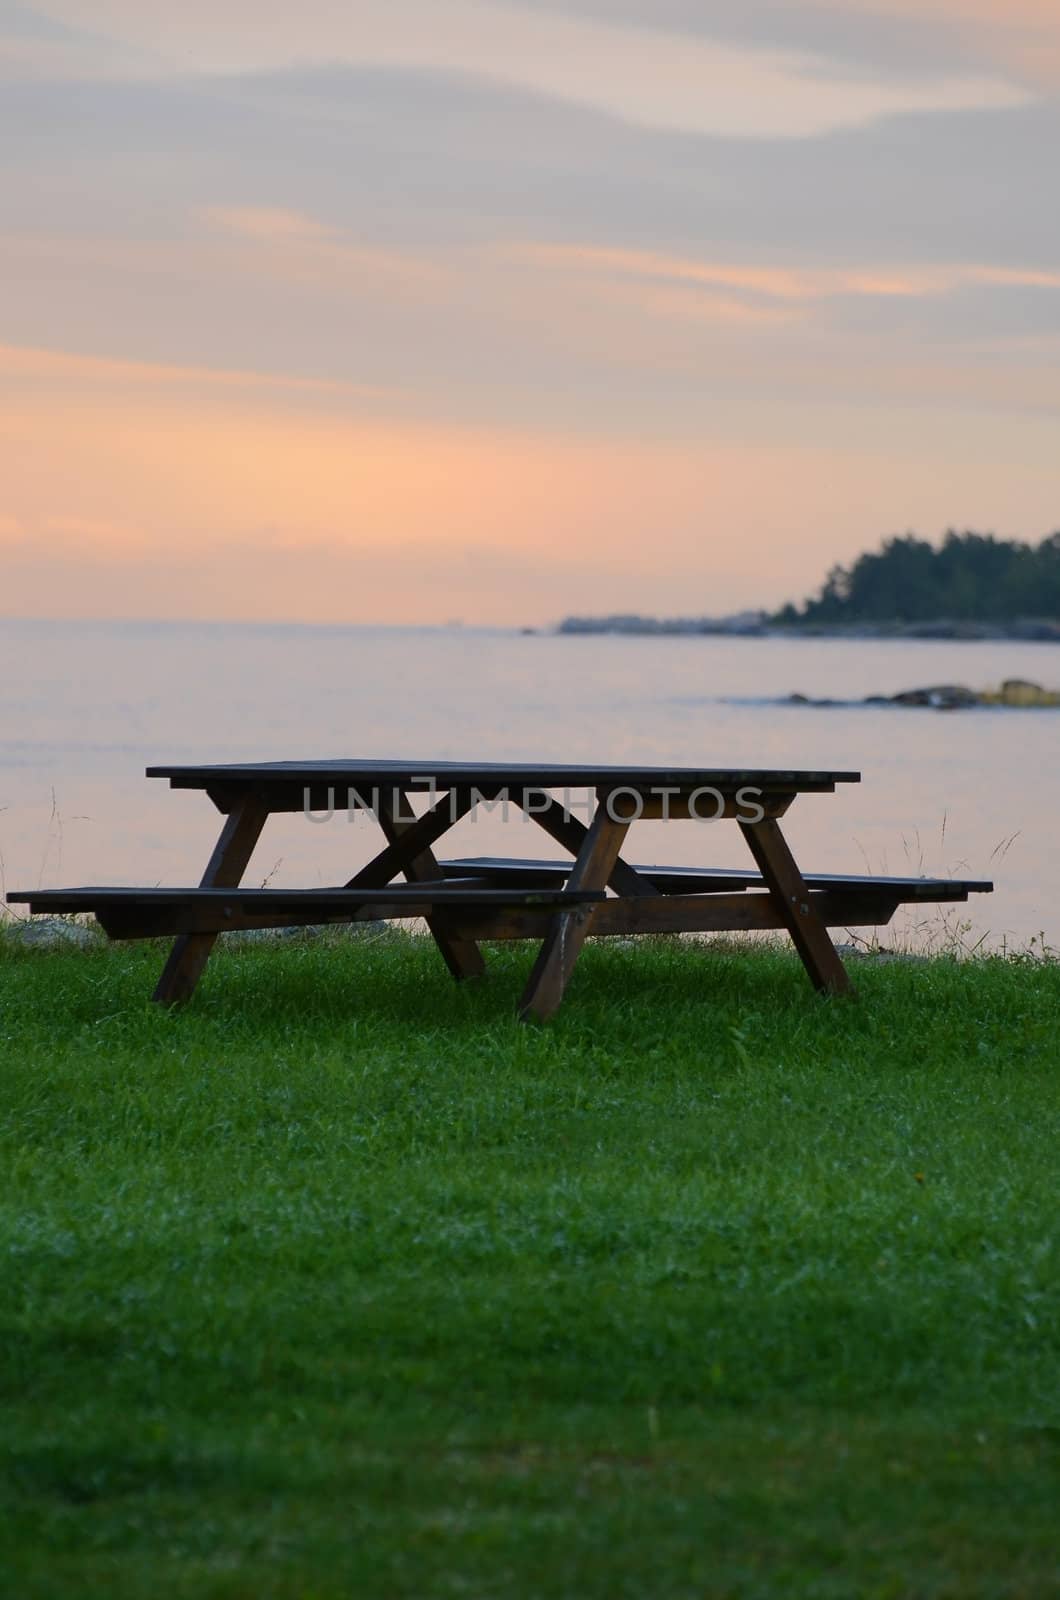 A bench at a rest area by the sea